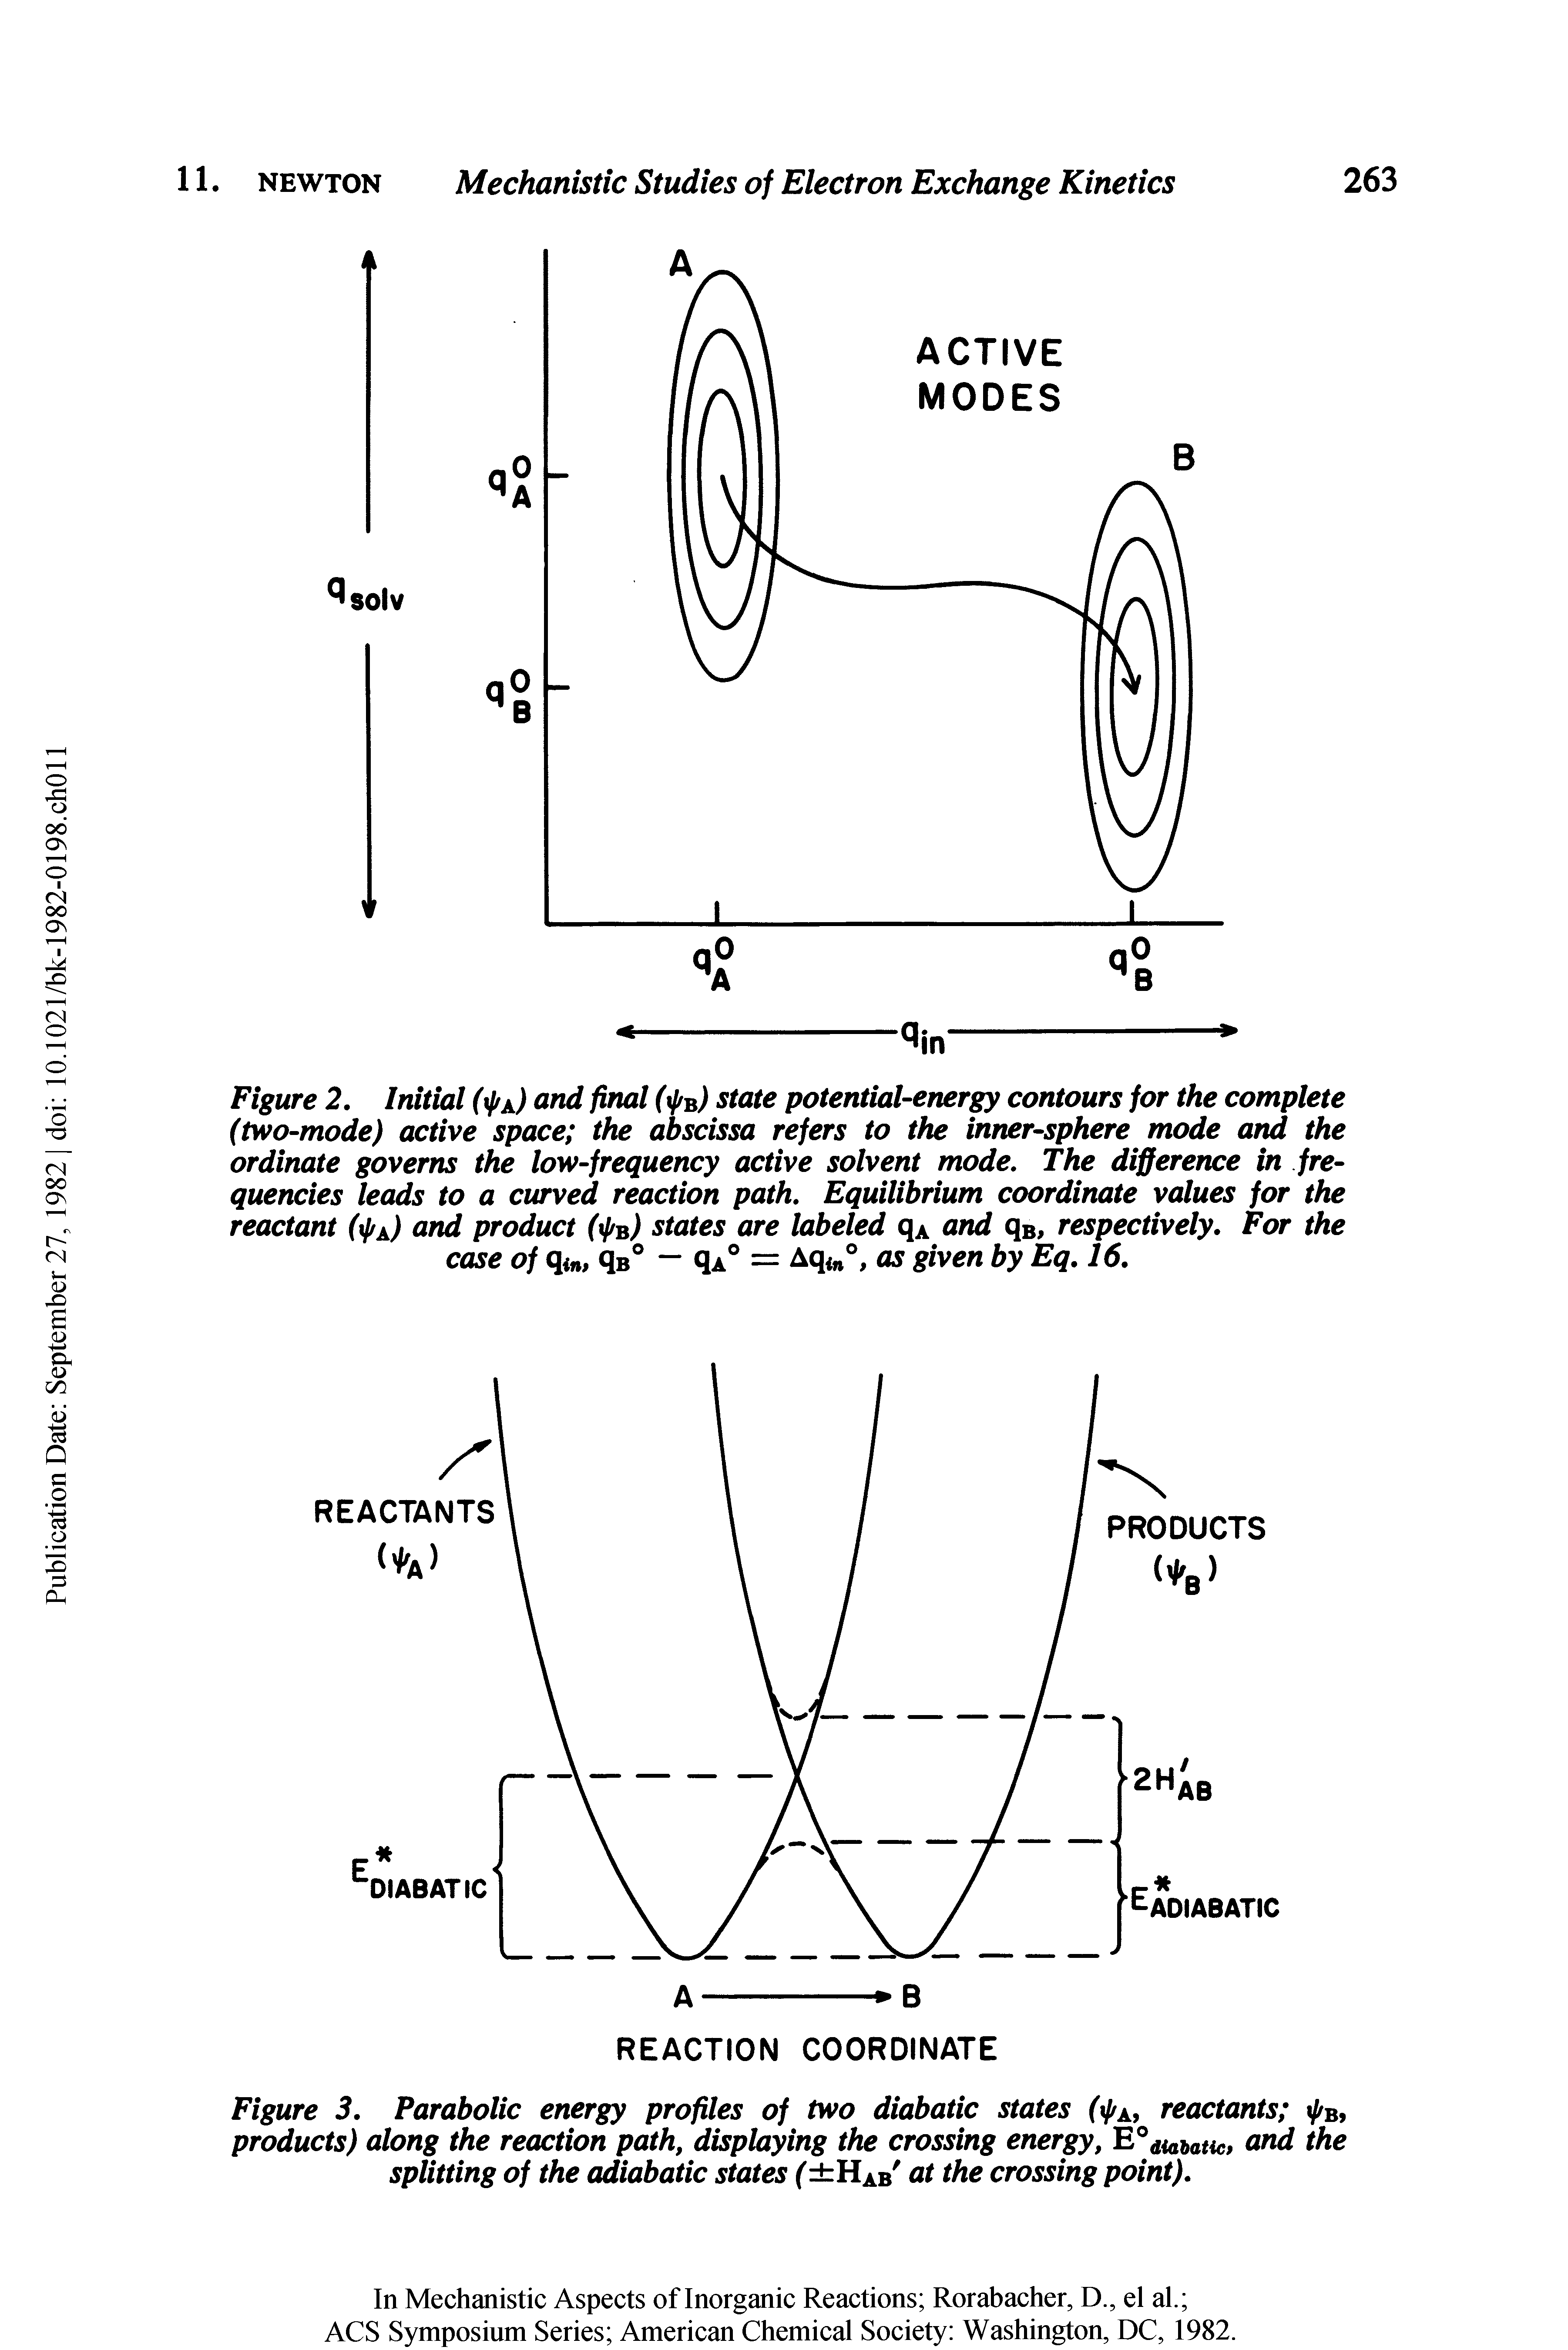 Figure 2. Initial ( (/a) and final ( J/b) state potential-energy contours for the complete (two-mode) active space the abscissa refers to the inner-sphere mode and the ordinate governs the low-frequency active solvent mode. The difference in frequencies leads to a curved reaction path. Equilibrium coordinate values for the reactant ( j/A) and product ( J/b) states are labeled qA and qB, respectively. For the case of qin, qB° - qA° = Aqin°, as given by Eq. 16.